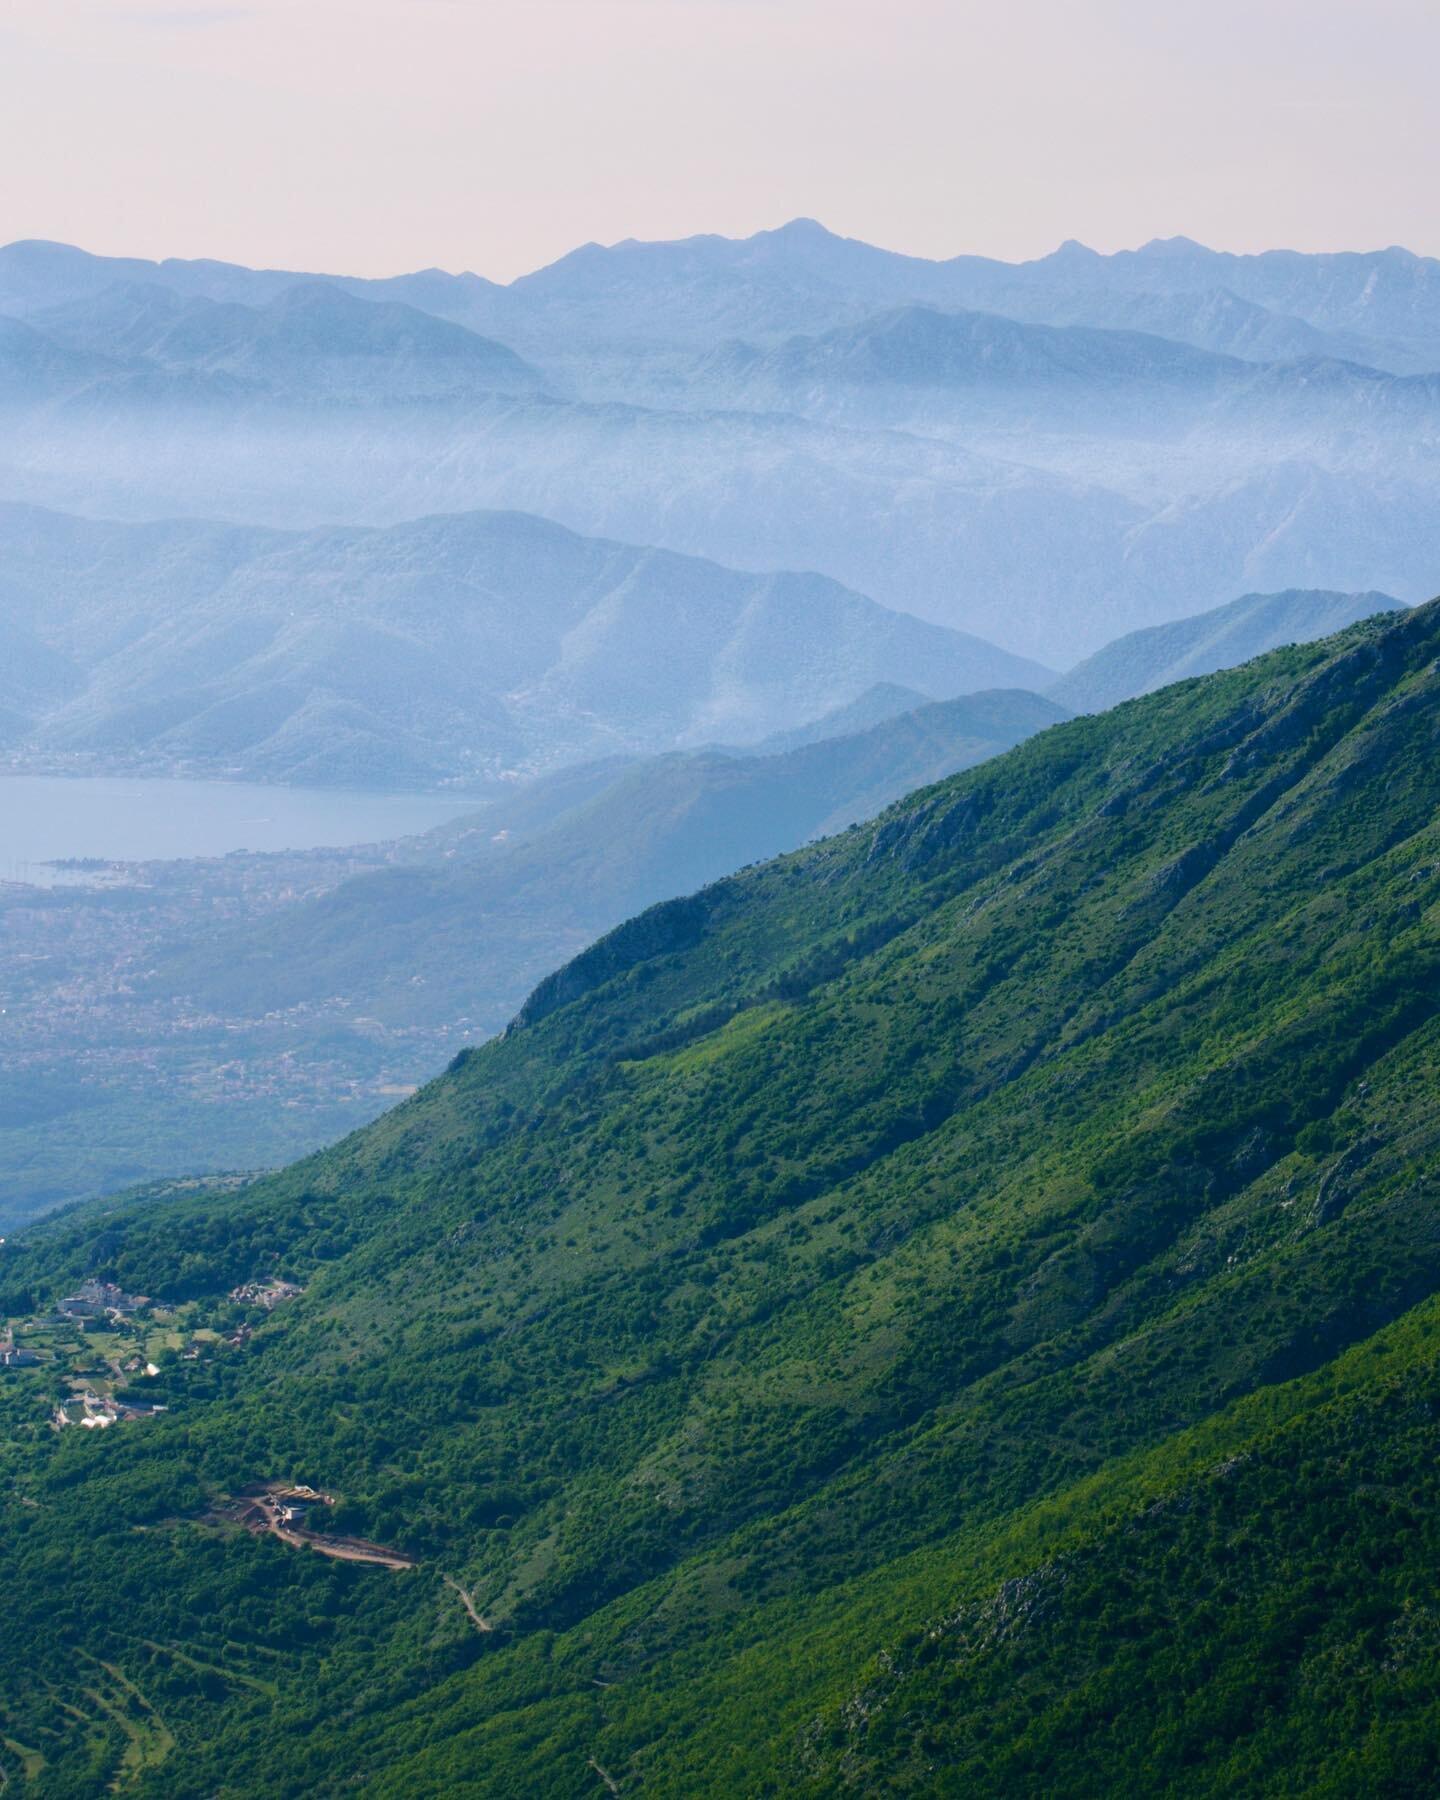 There are several things to love about Montenegro, and one of them is its hiking trails.

Lovcen National Park is located just above the old city of Kotor. If you can survive the drive up the treacherous Serpentine Road, you'll be met with several tr